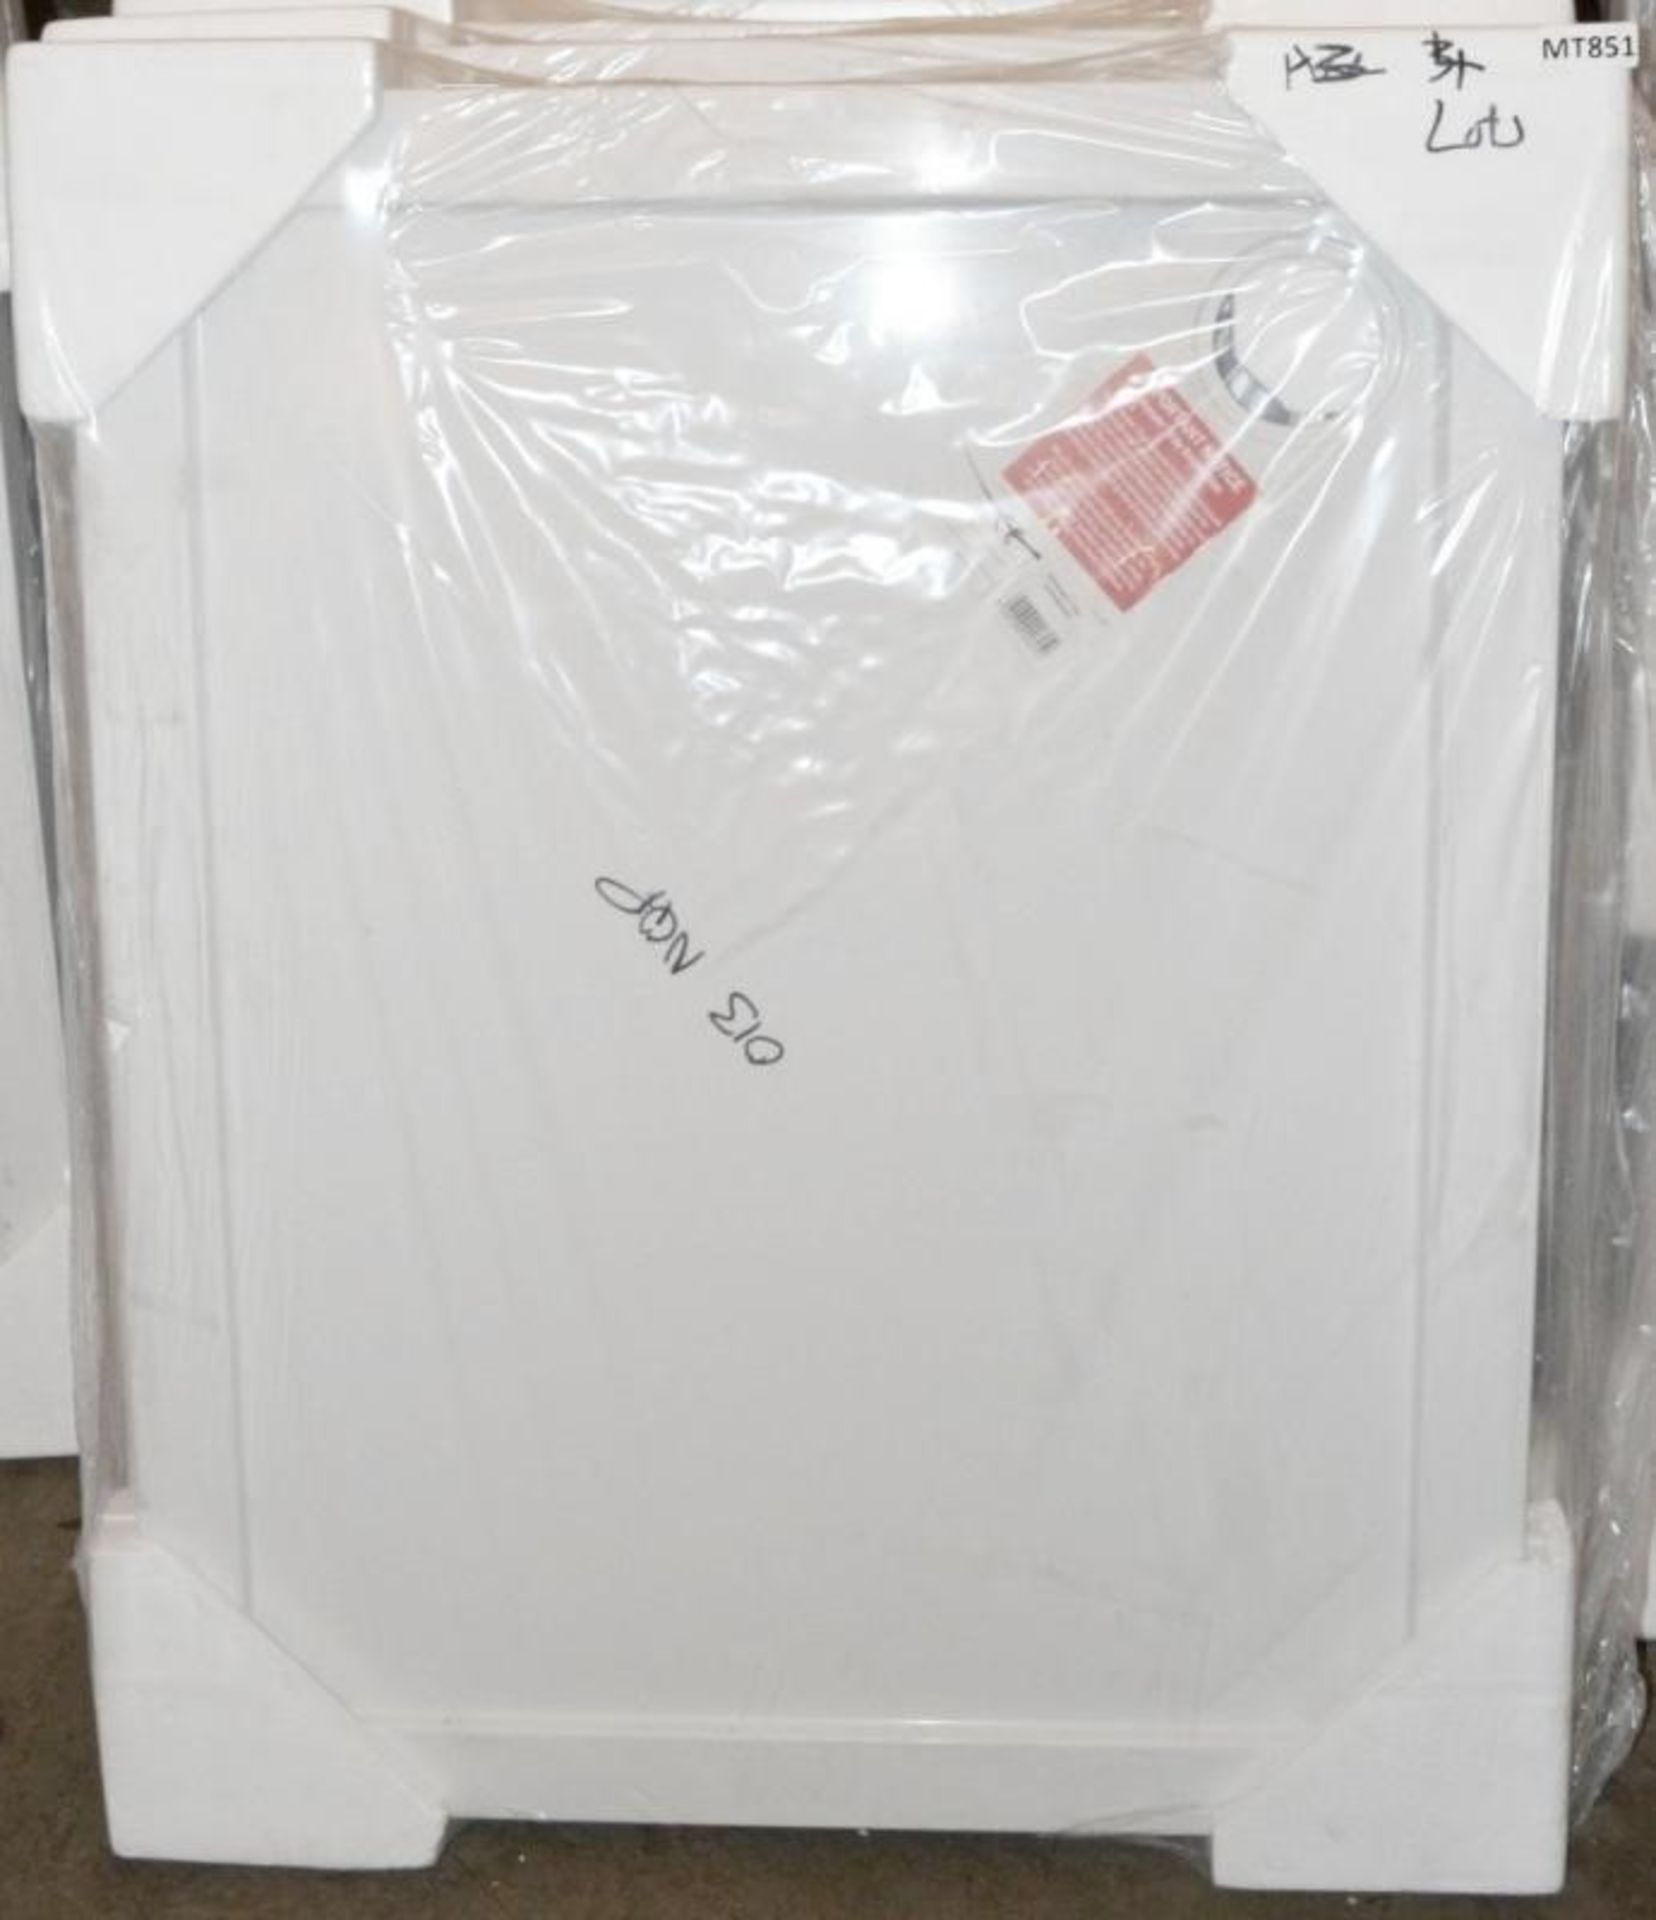 1 x White Pearlstone Rectangular Shower Tray (NTP013) - Dimensions: 1000 x 800 x 40mm - New / Unused - Image 2 of 2